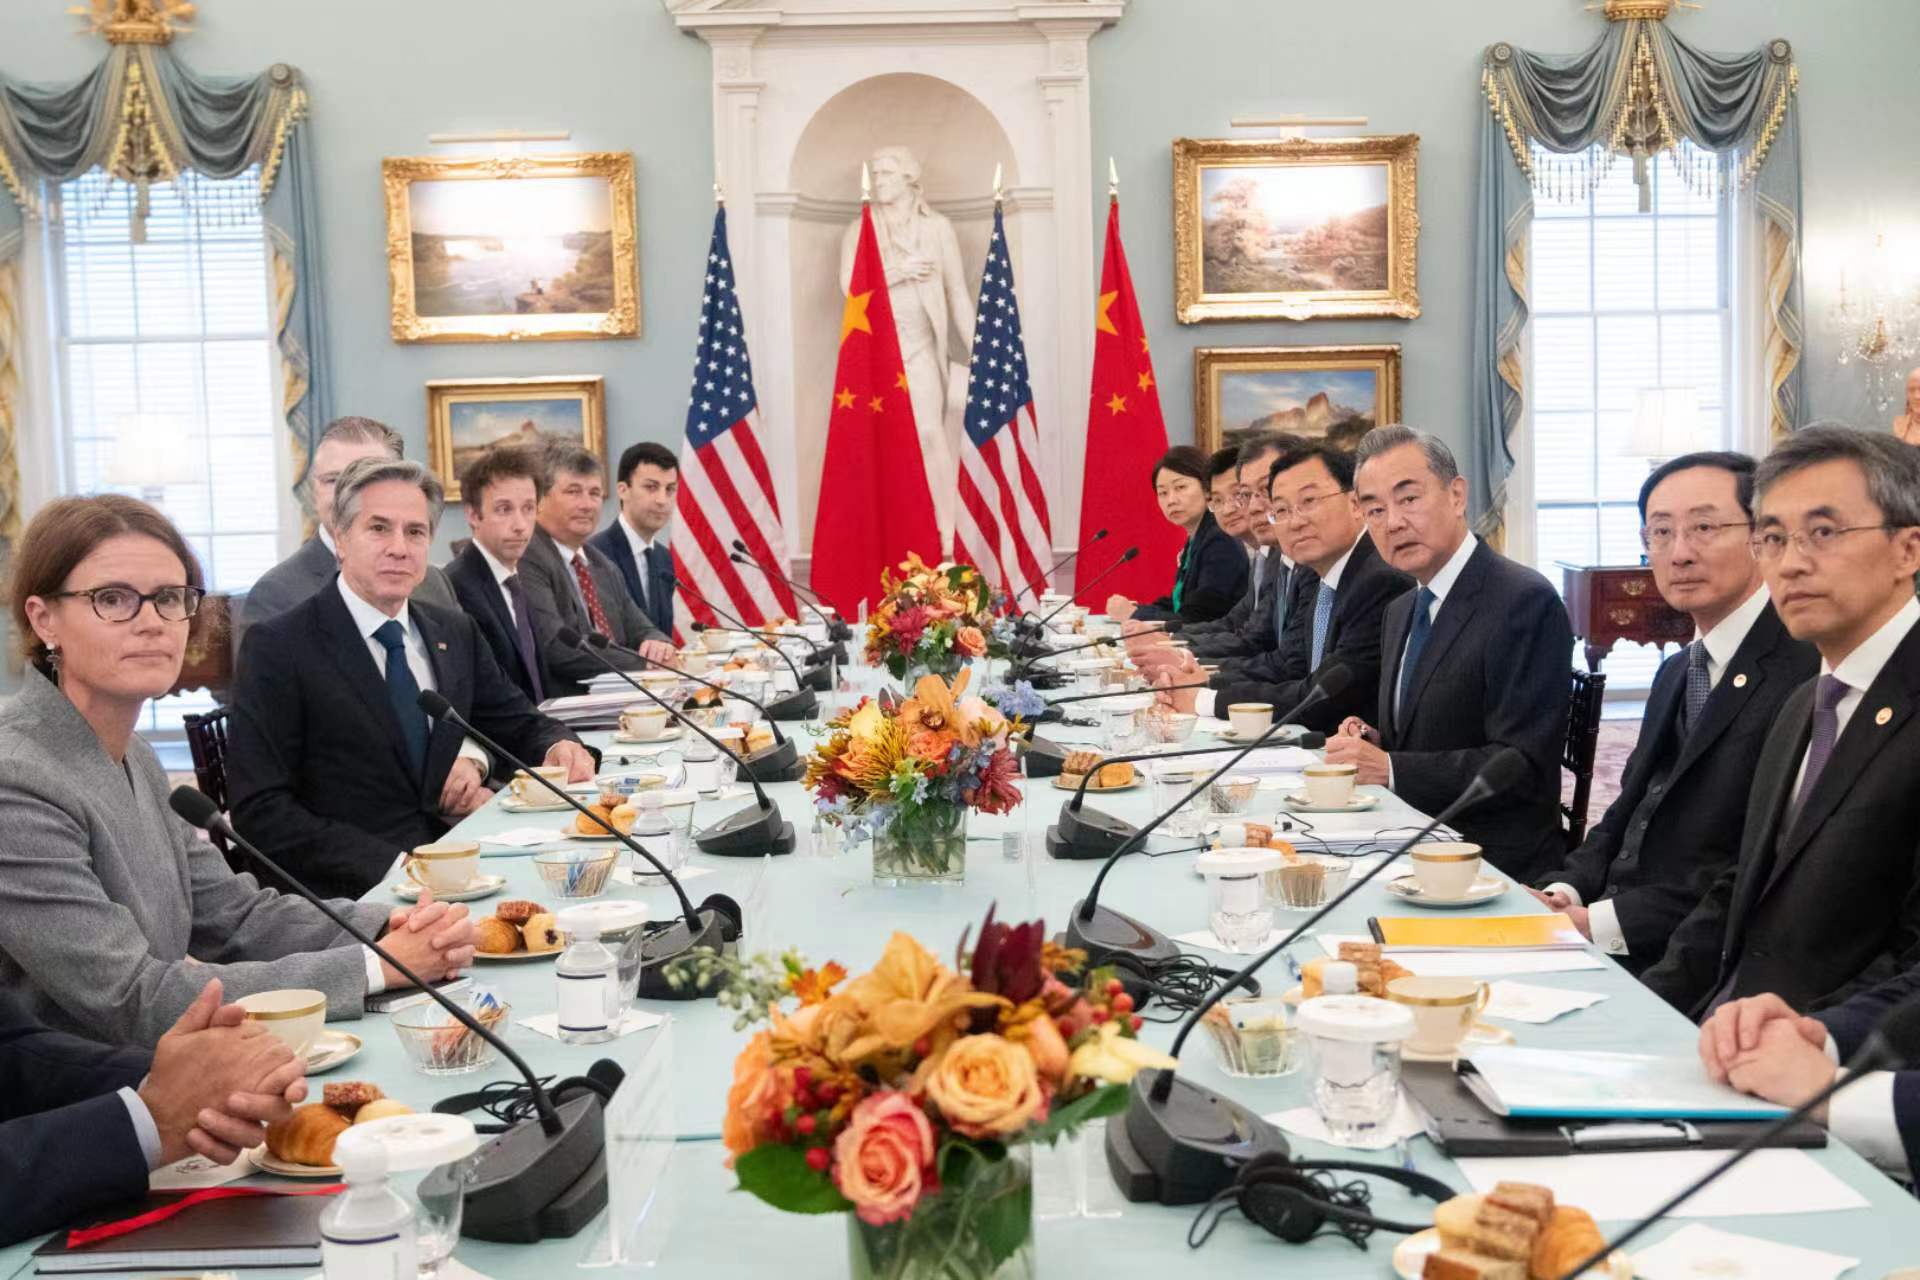 Wang Yi, a member of the Political Bureau of the Communist Party of China Central Committee and Chinese foreign minister, holds talks with U.S. Secretary of State Antony Blinken in Washington, D.C., the U.S. /Chinese Foreign Ministry